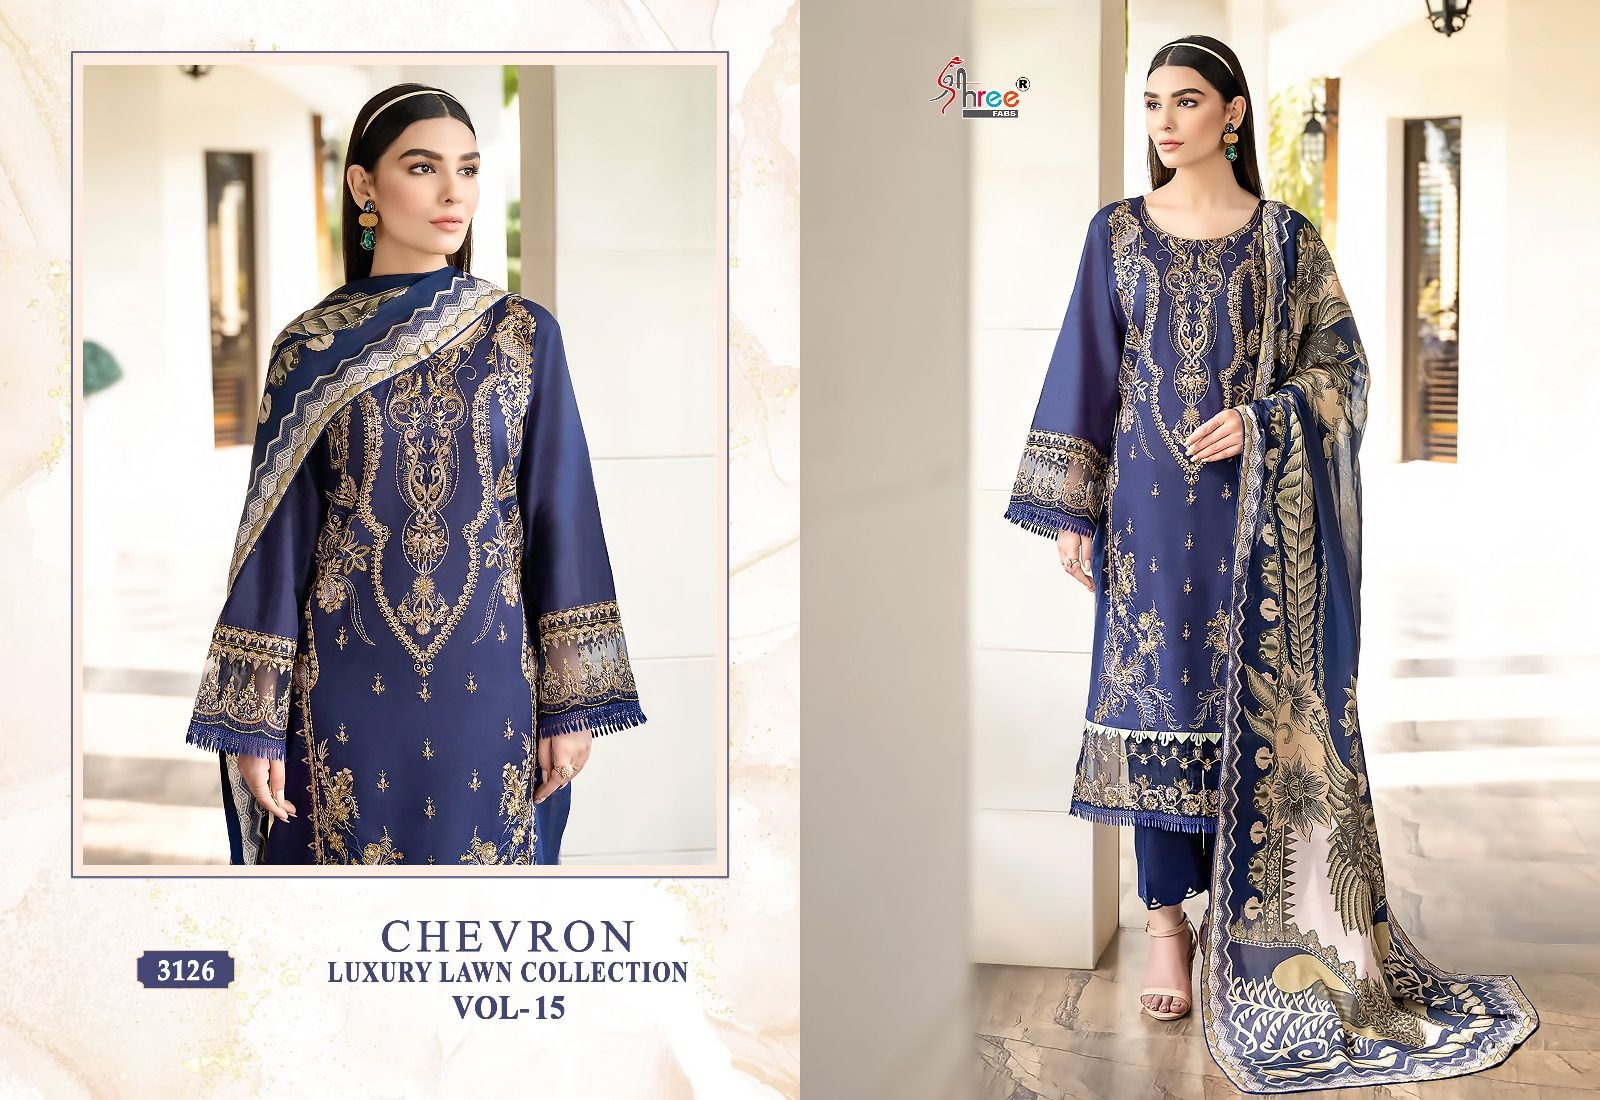 Shree Chevron Luxury Lawn Collection Vol 15 collection 5